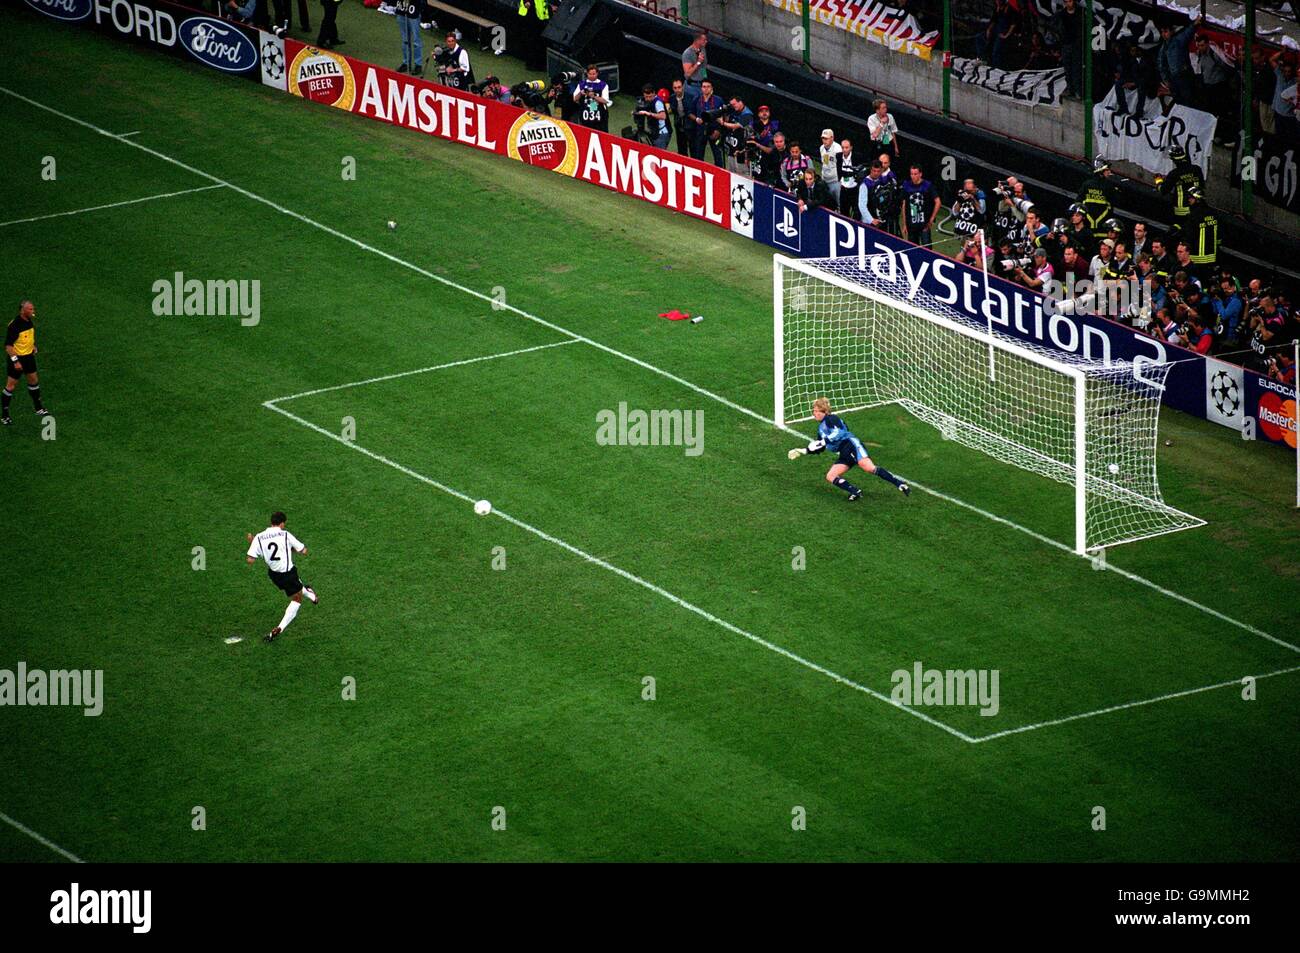 Soccer - UEFA Champions League - Final - Bayern Munich v Valencia. Bayern Munich goalkeeper Oliver Kahn (r) dives to his right to save the crucial penalty from Valencia's Mauricio Pellegrino (l) Stock Photo